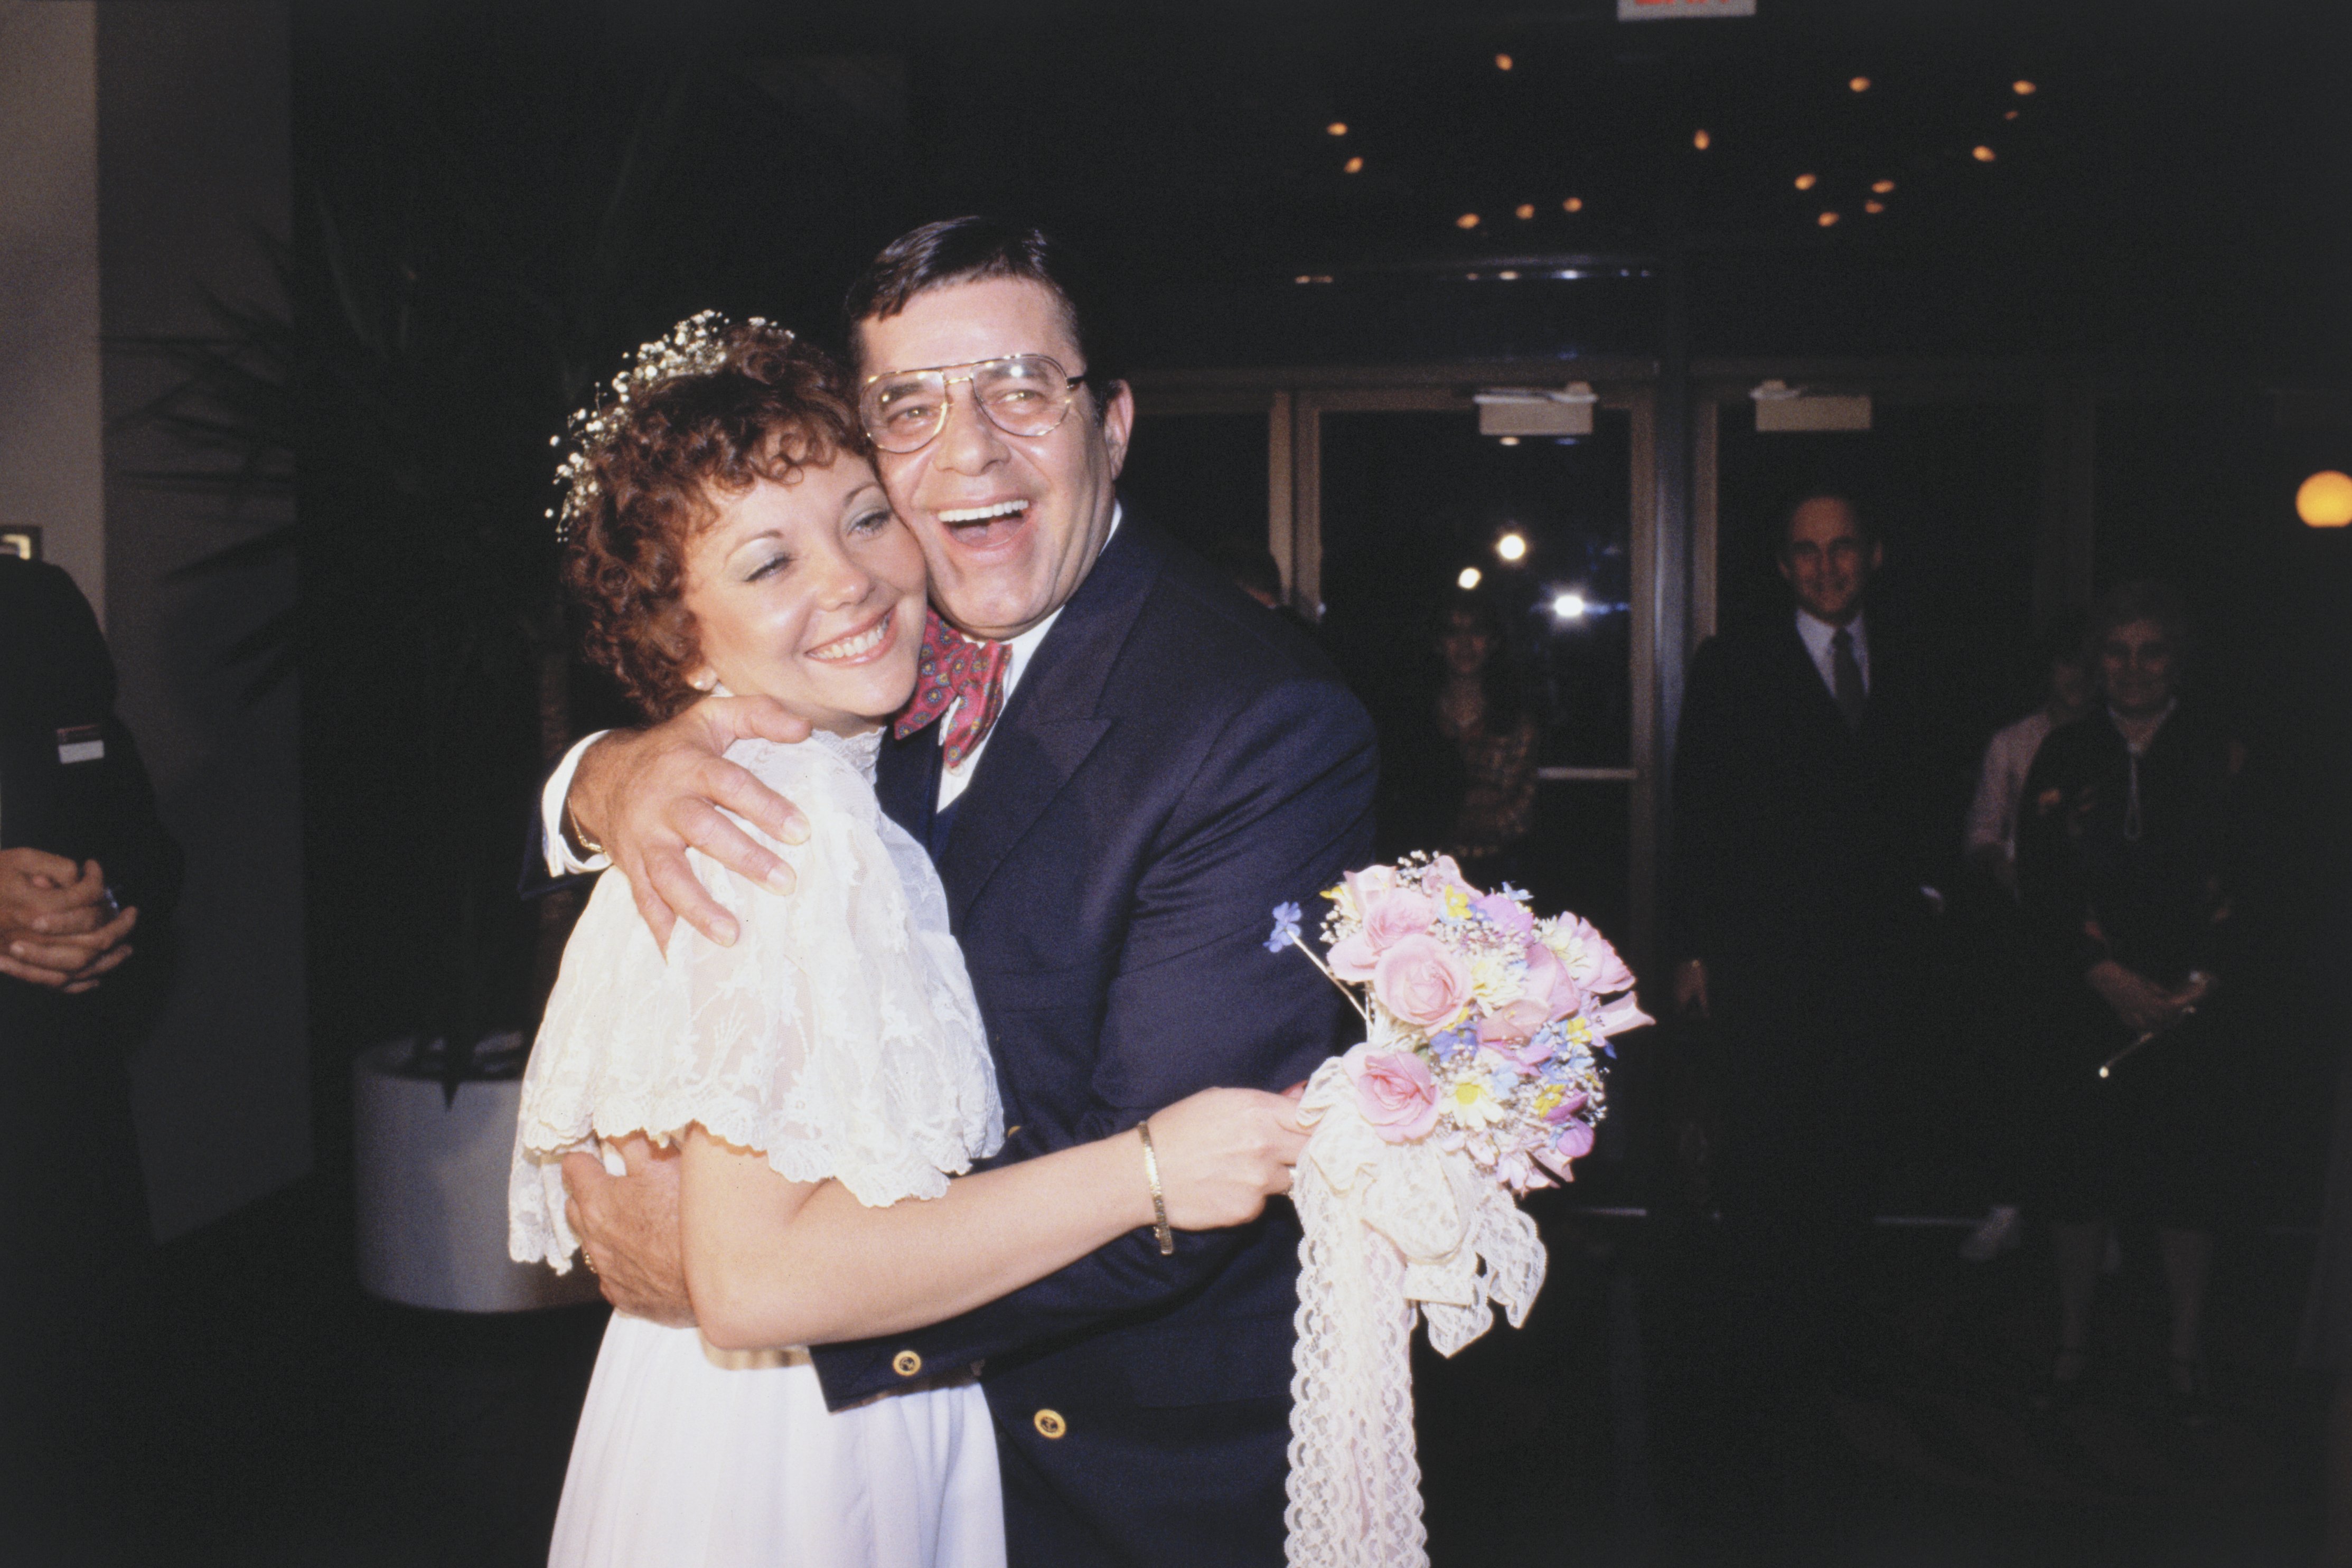 Jerry Lewis with his new bride Sandra Pitnick pictured after their wedding which was a small private ceremony on February 13, 1983. / Source: Getty Images